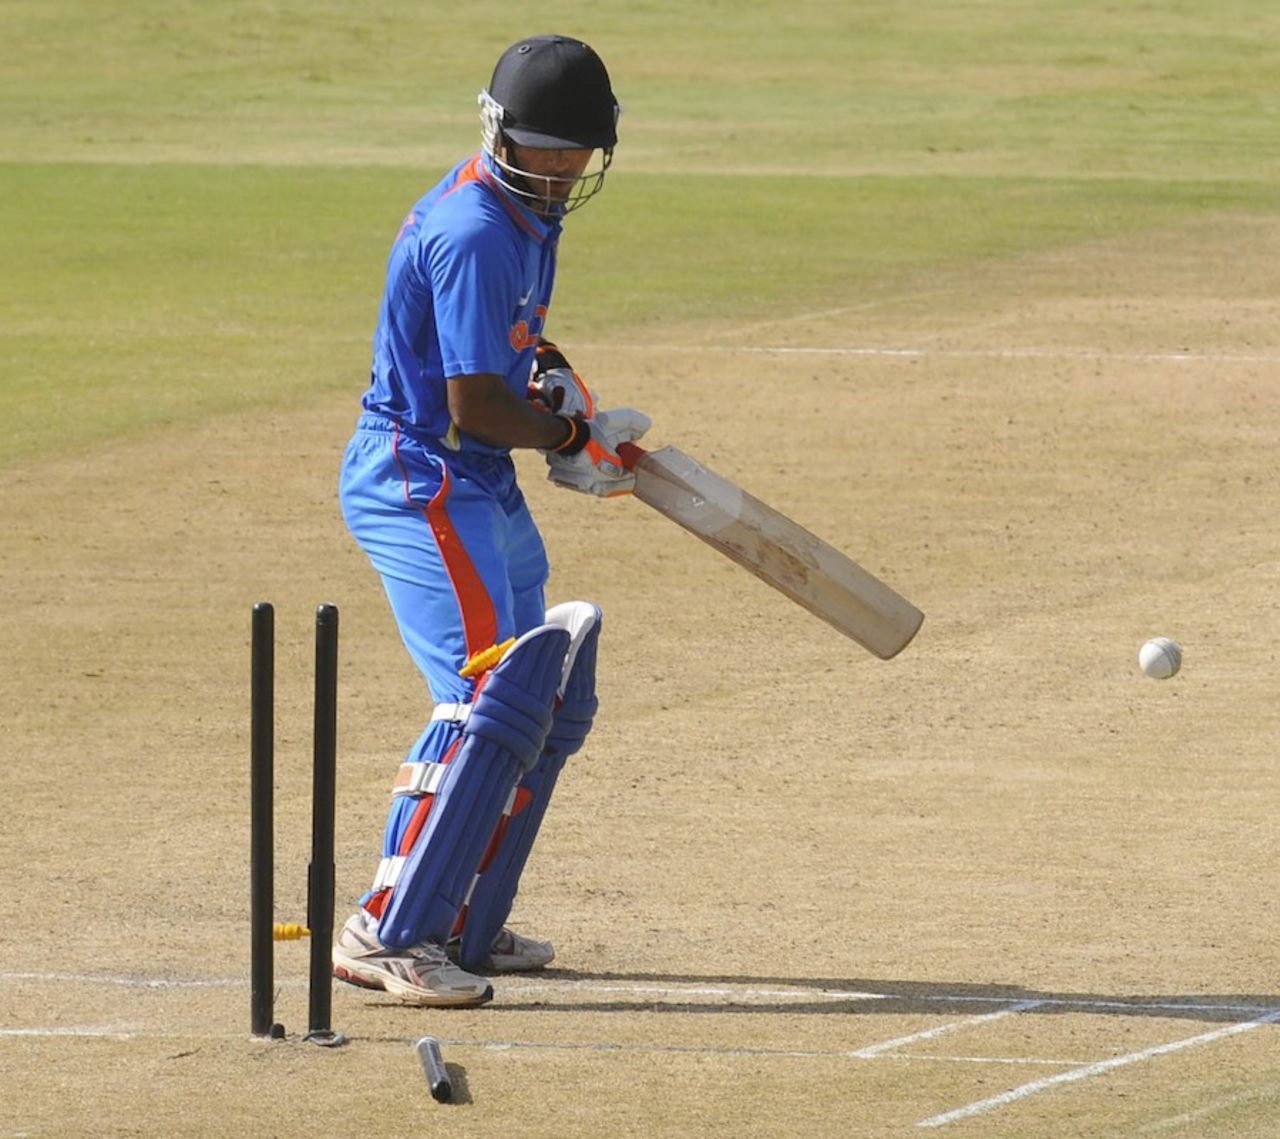 Unmukt Chand was bowled by Adam Milne, India A v New Zealand A, 2nd unofficial ODI, Visakhapatnam, September 10, 2013